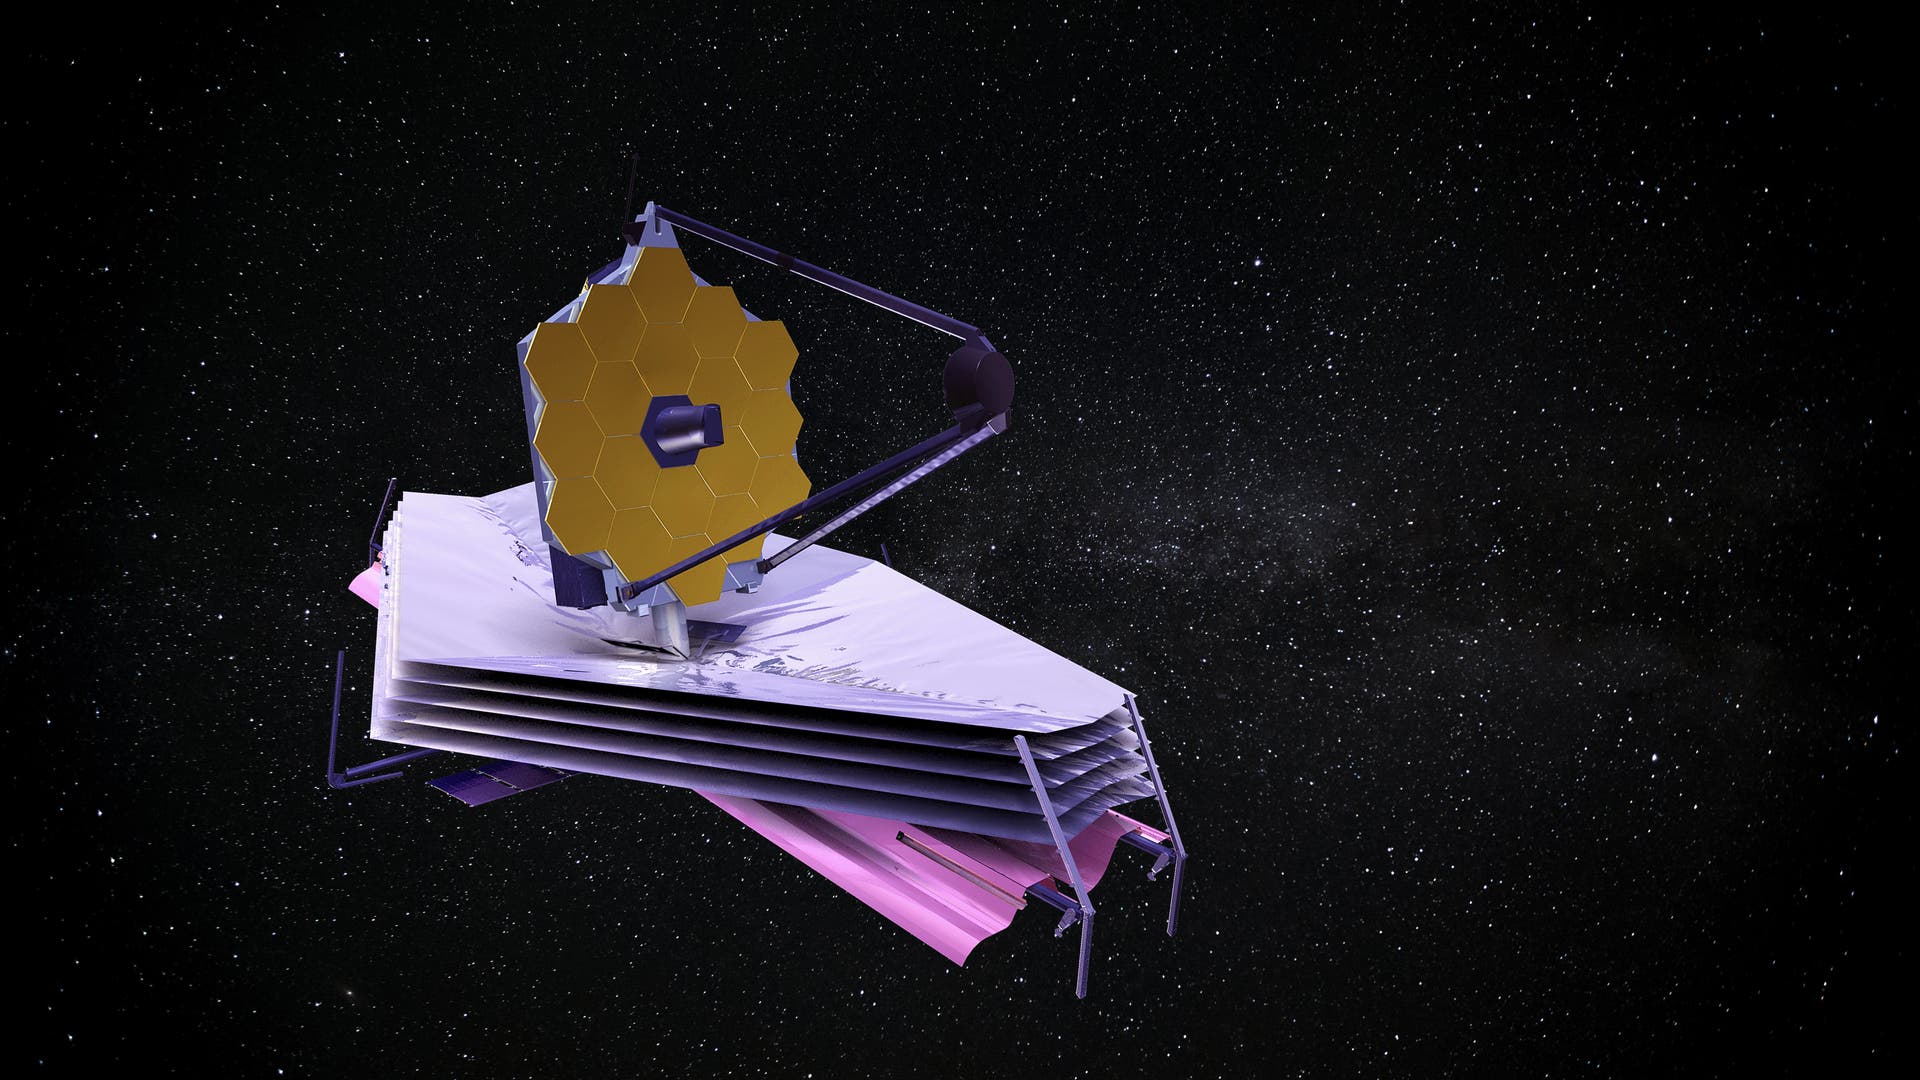 The James Webb Space Telescope: A New Era in Astronomy